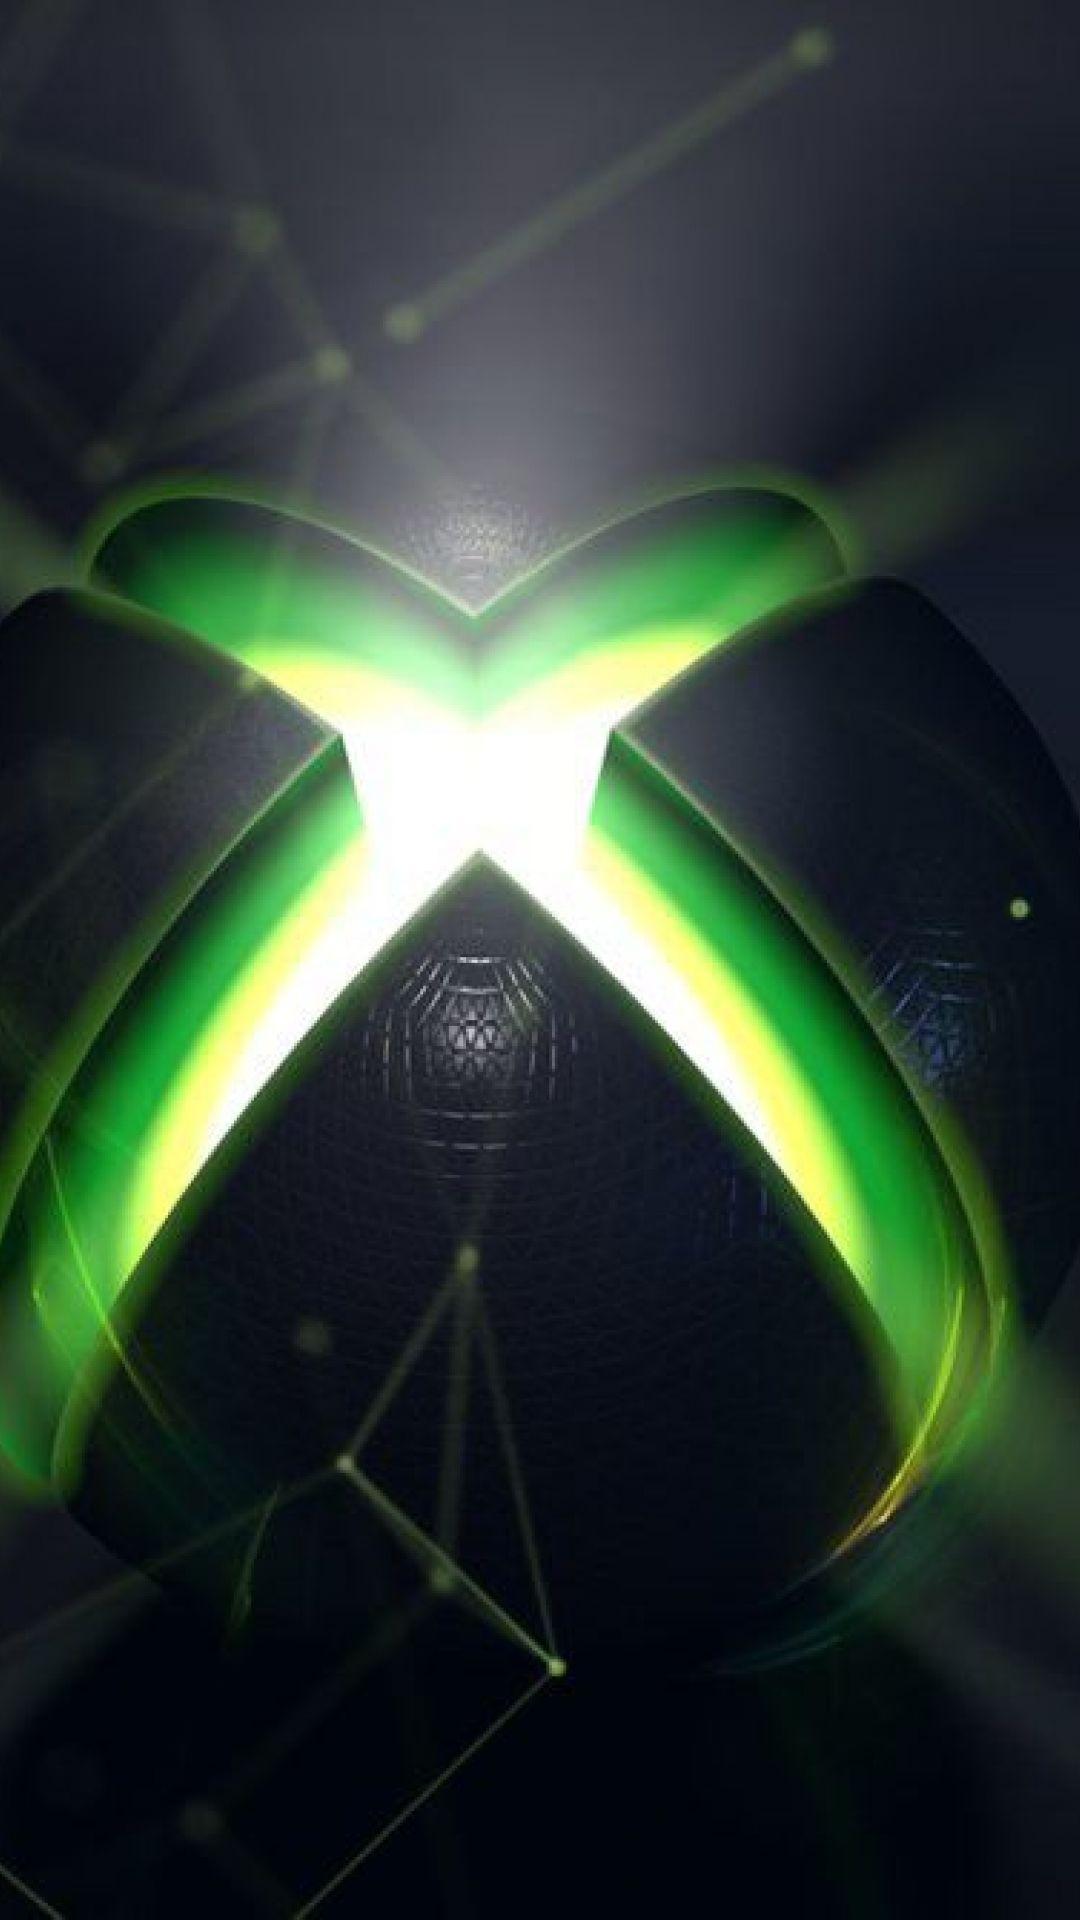 Xbox Phone Wallpapers on WallpaperDog